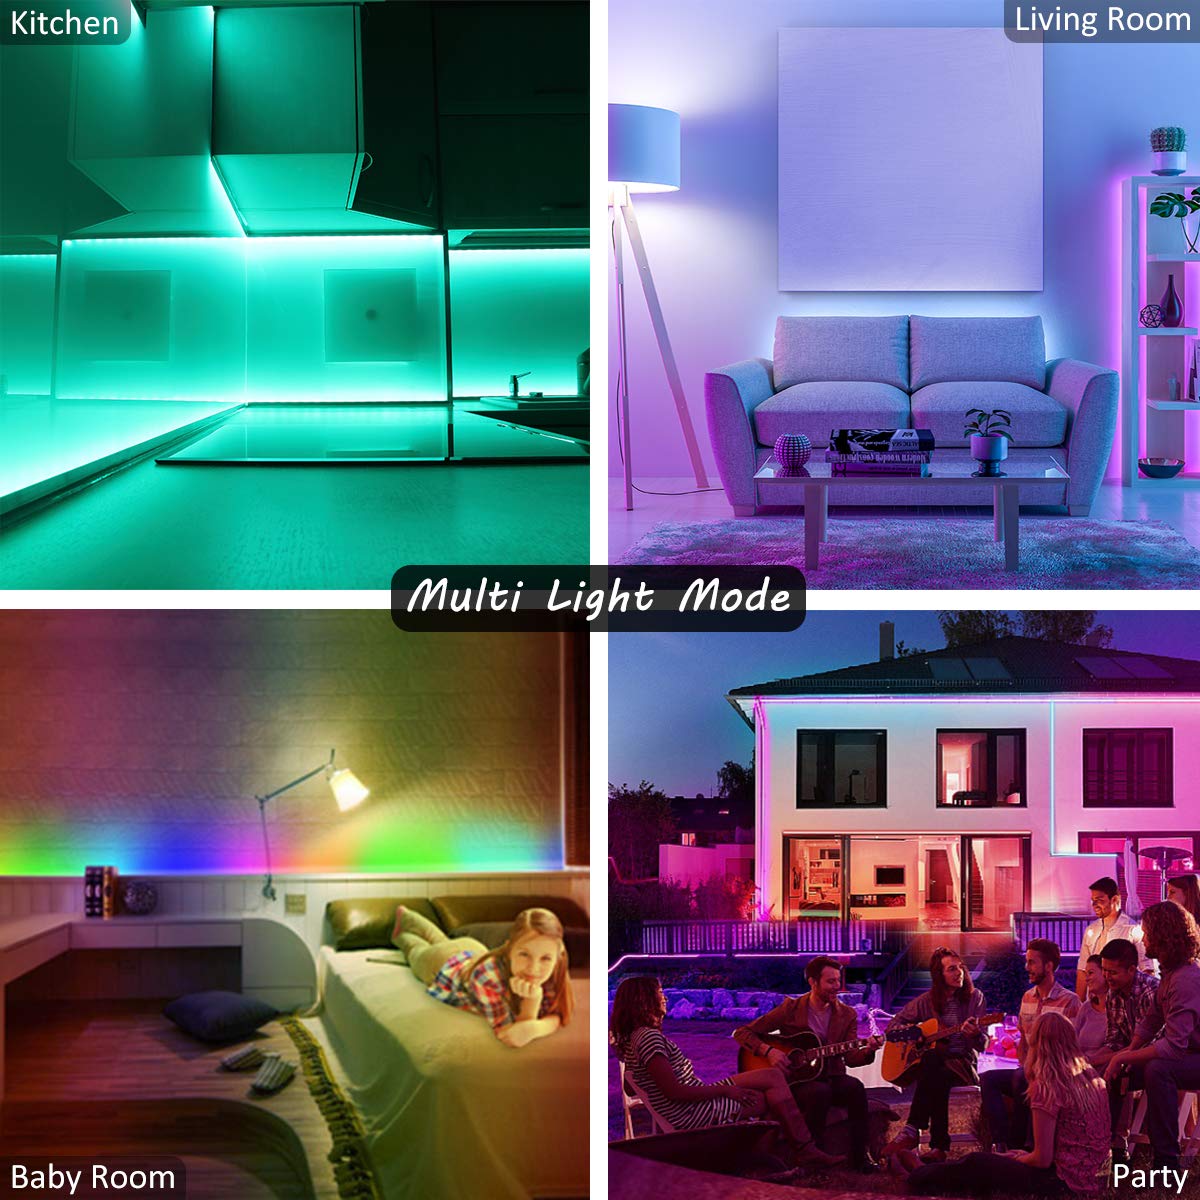 Led Lights for Bedroom, L8star 50ft Rgb Led Strip Lights with Bluetooth and Remote Control Sync to Music